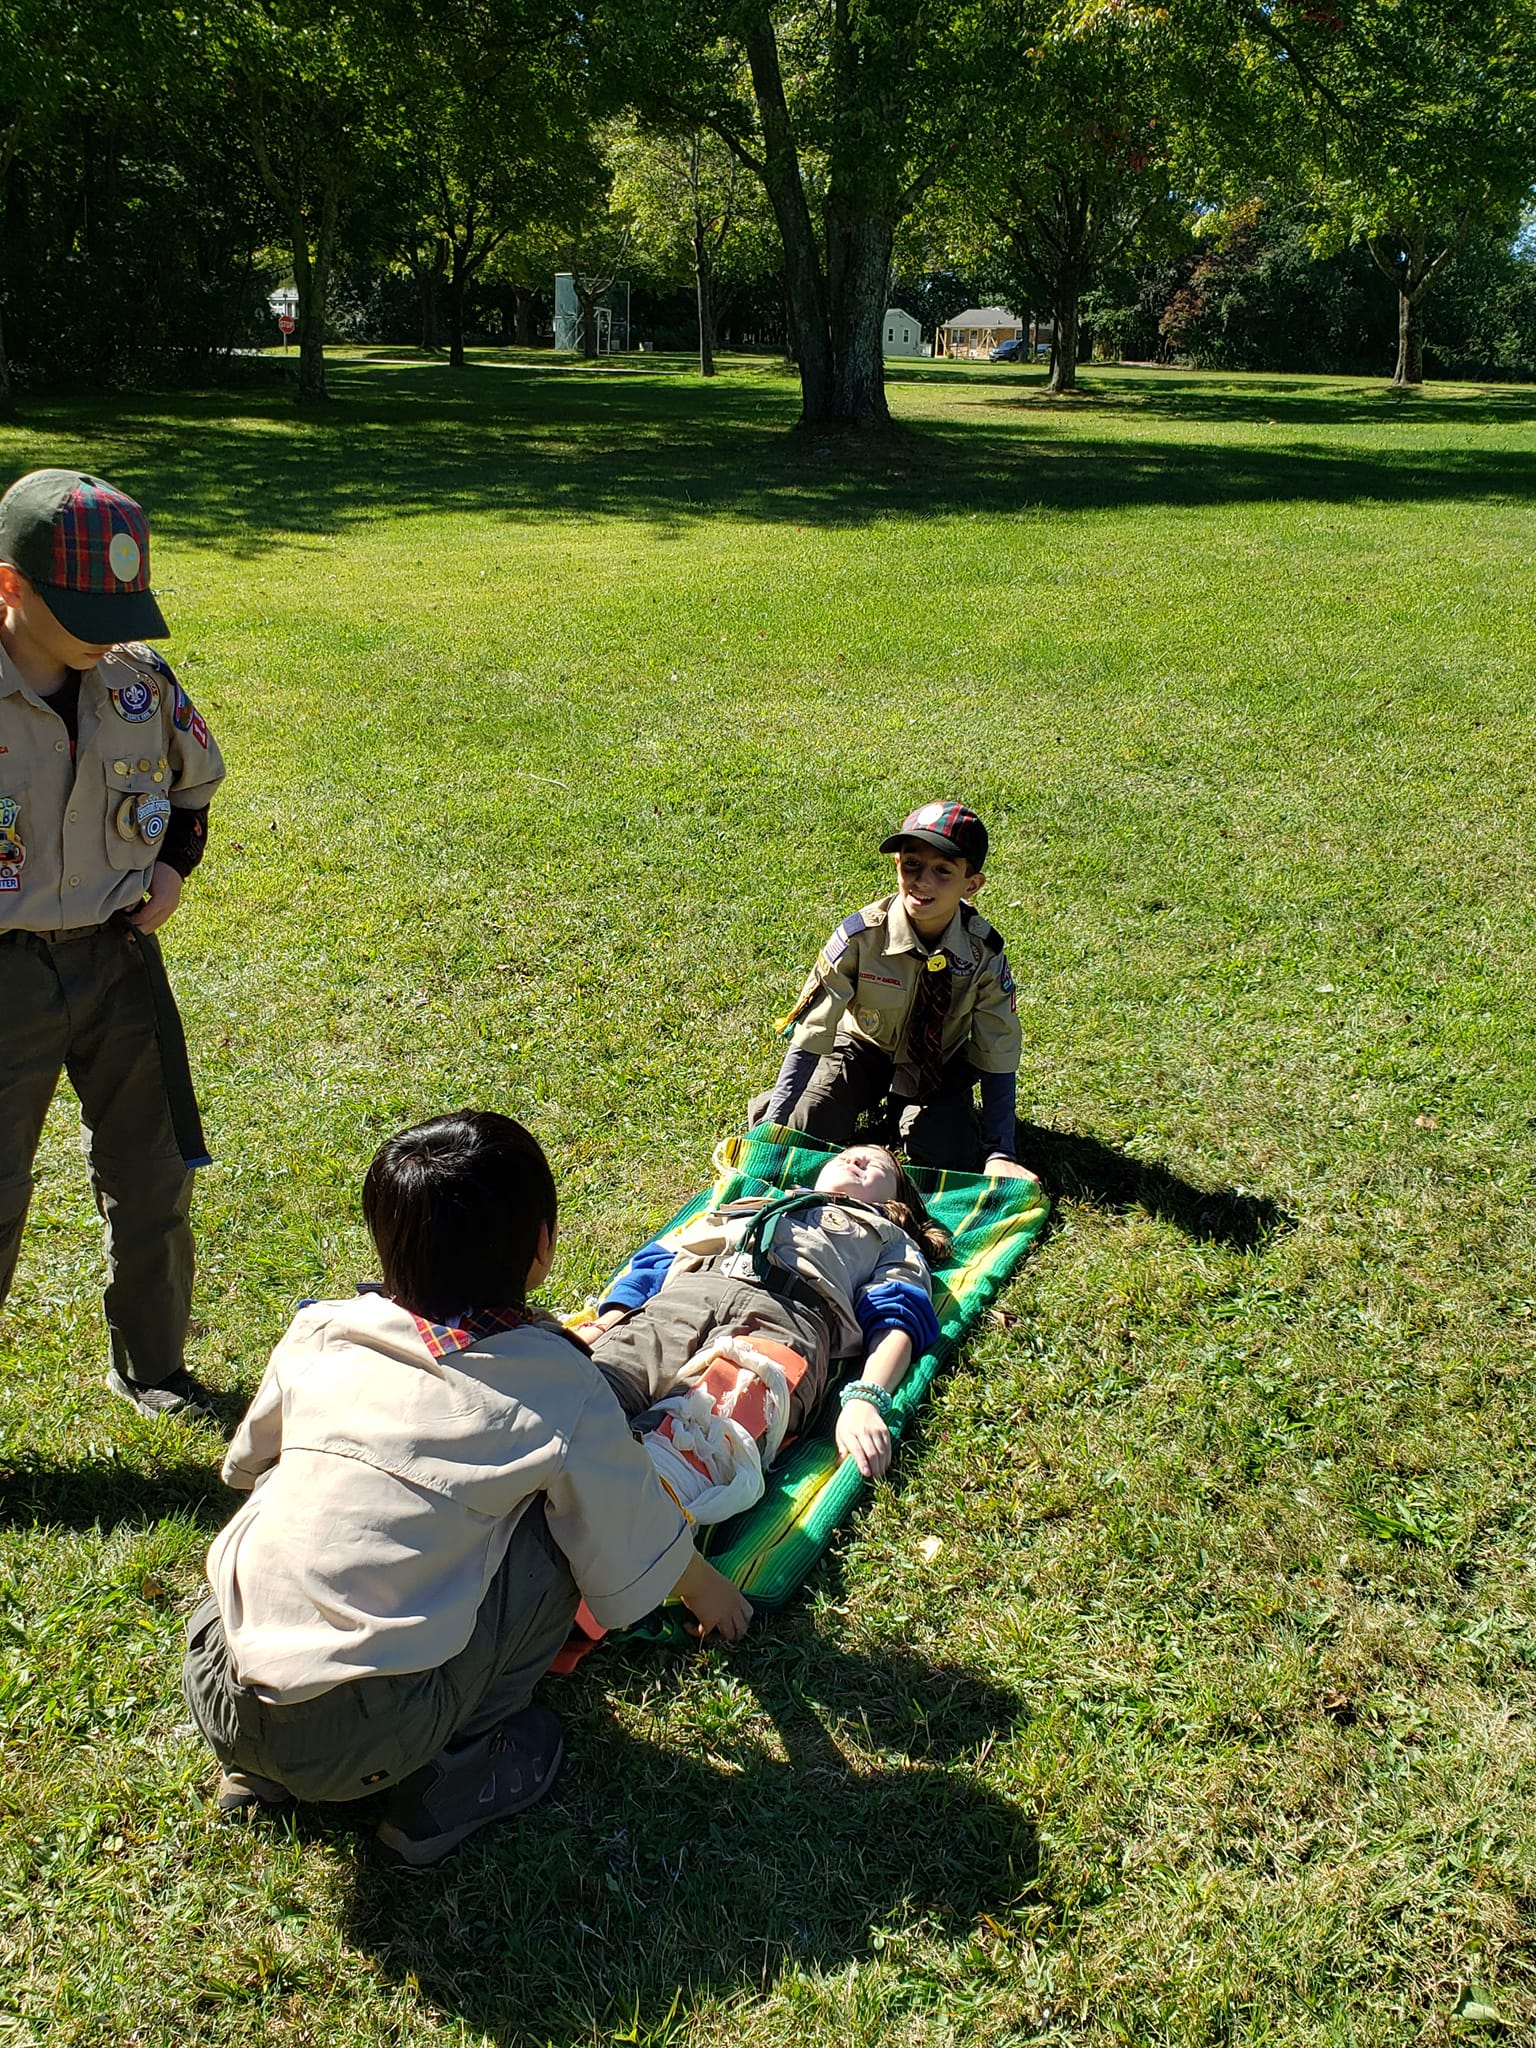 Learning to carry an injured person on a stretcher!